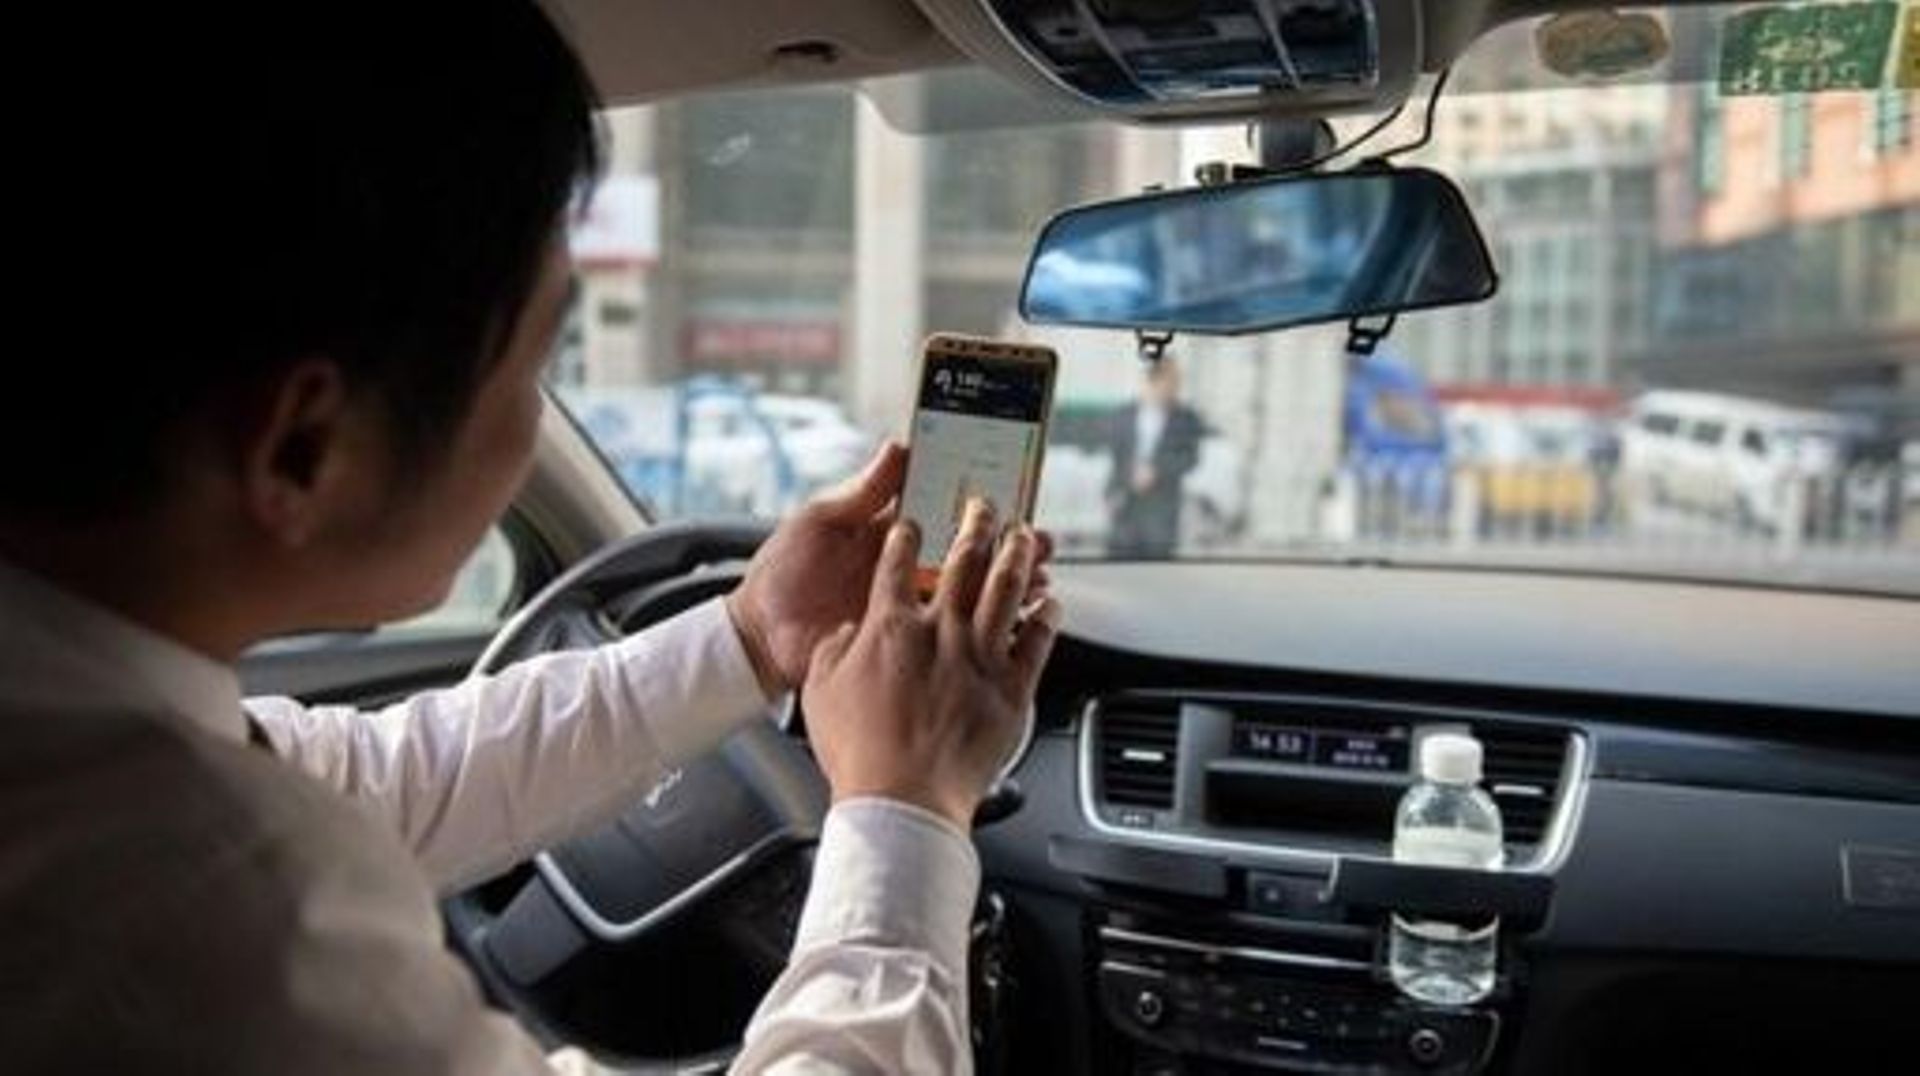 In this picture taken on October 18, 2018, a driver working for ride-sharing company Didi uses his smartphone to choose the best driving route to bring a customer to his destination in Beijing. Didi is a popular taxi and ride-sharing service in China tha